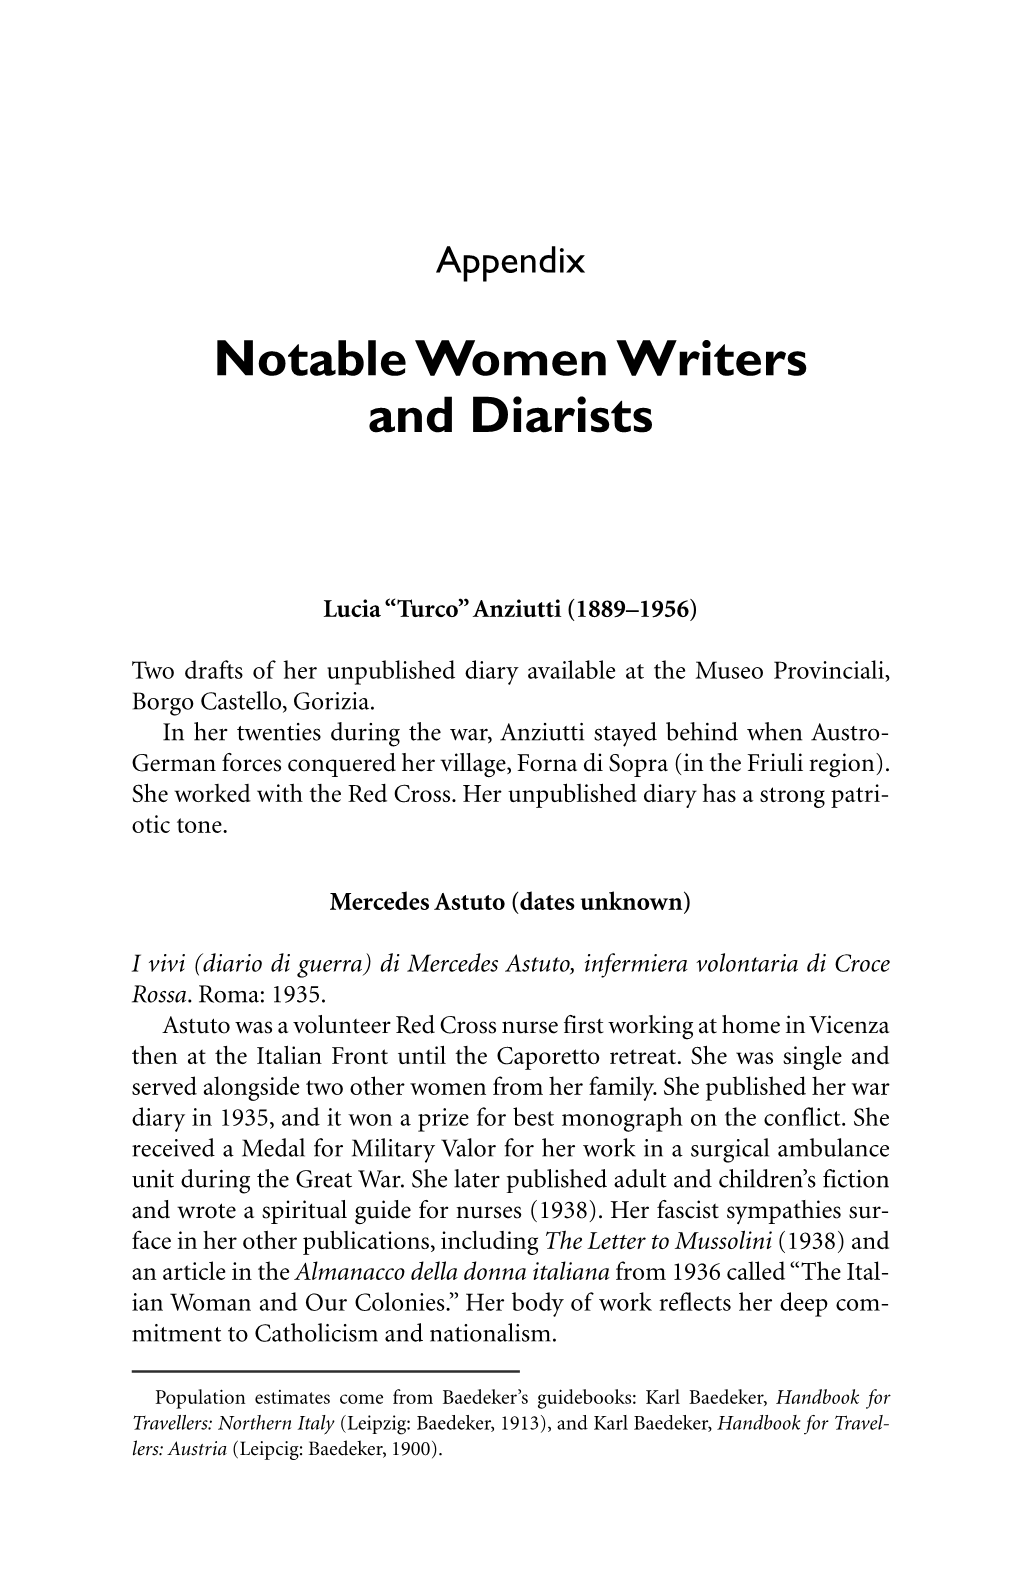 Notable Women Writers and Diarists